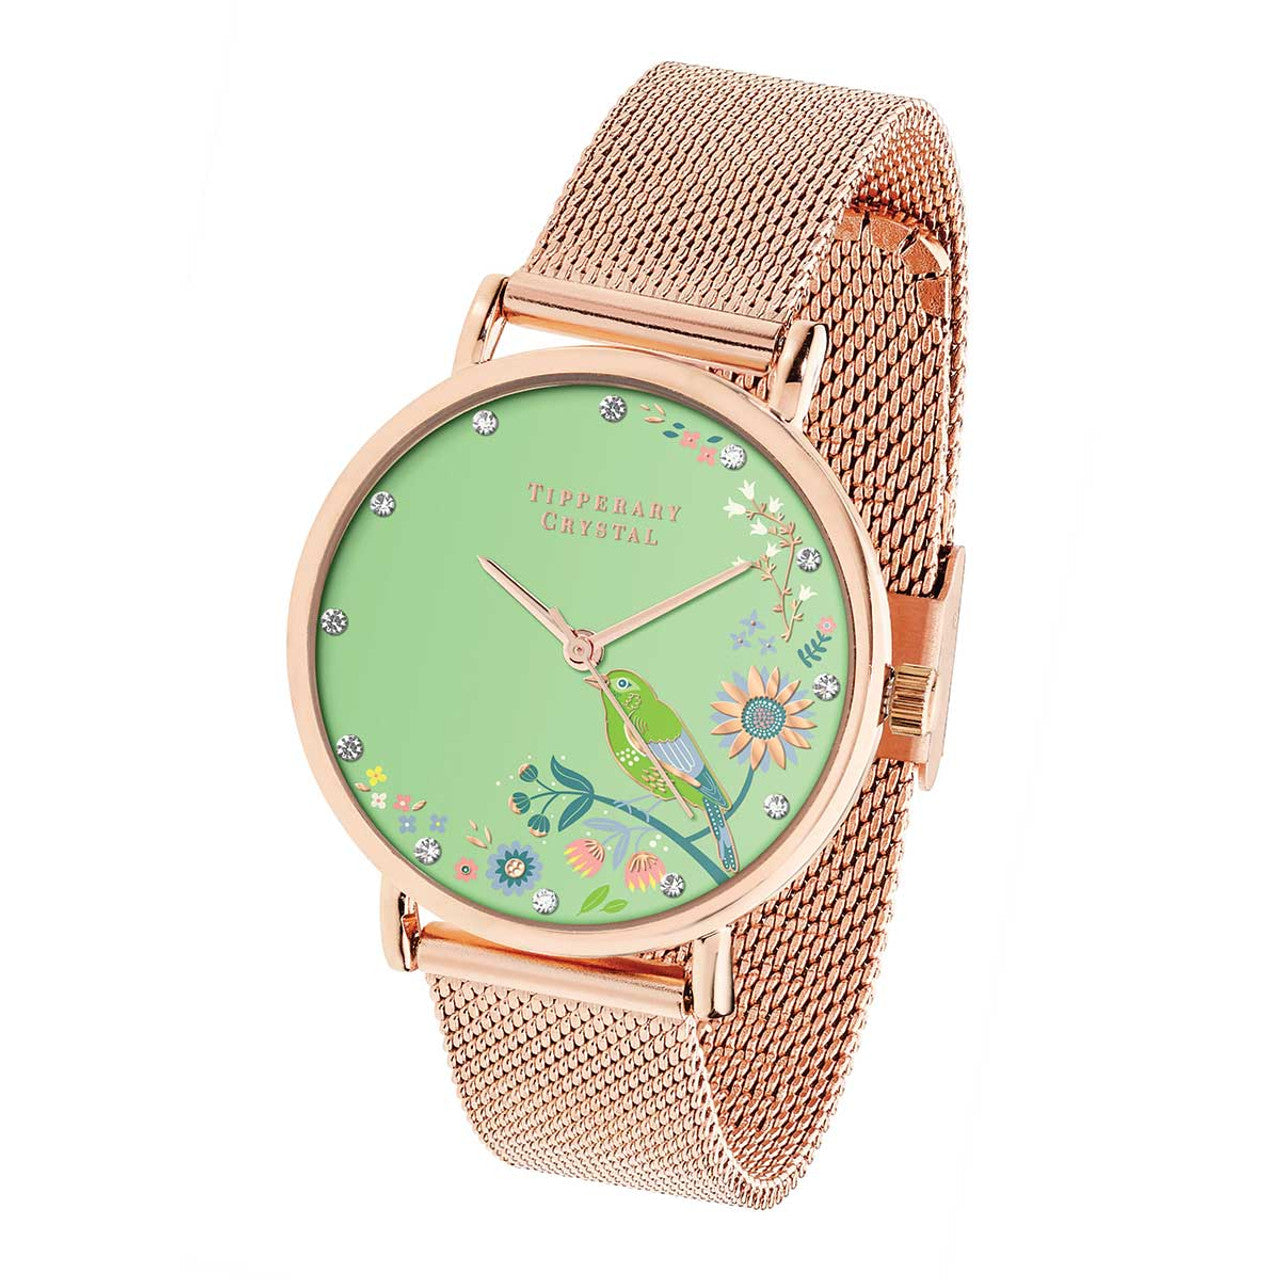 Tipperary Crystal Birdy Greenfinch Rose Gold Birdy Watch  The Birdy Collection is a vibrant collection of rose gold watches showcasing the Birdy designs. The watches feature an array of Irish garden birds in an enchanted garden setting, embellished with rose gold detailing and crystal insets.